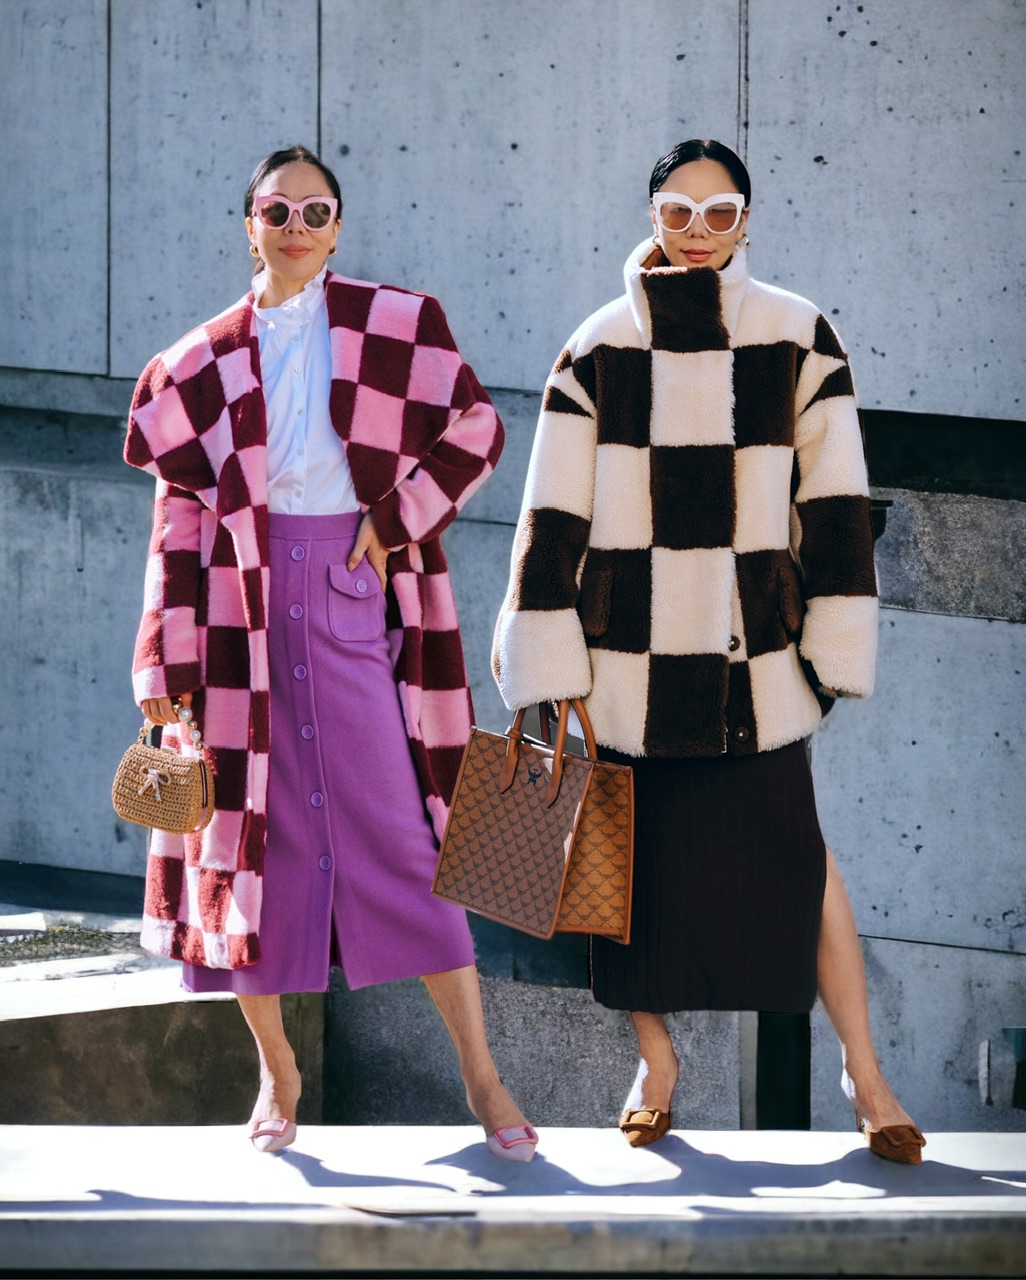 2 Checked Faux Fur Coat Looks, with Knit Dress